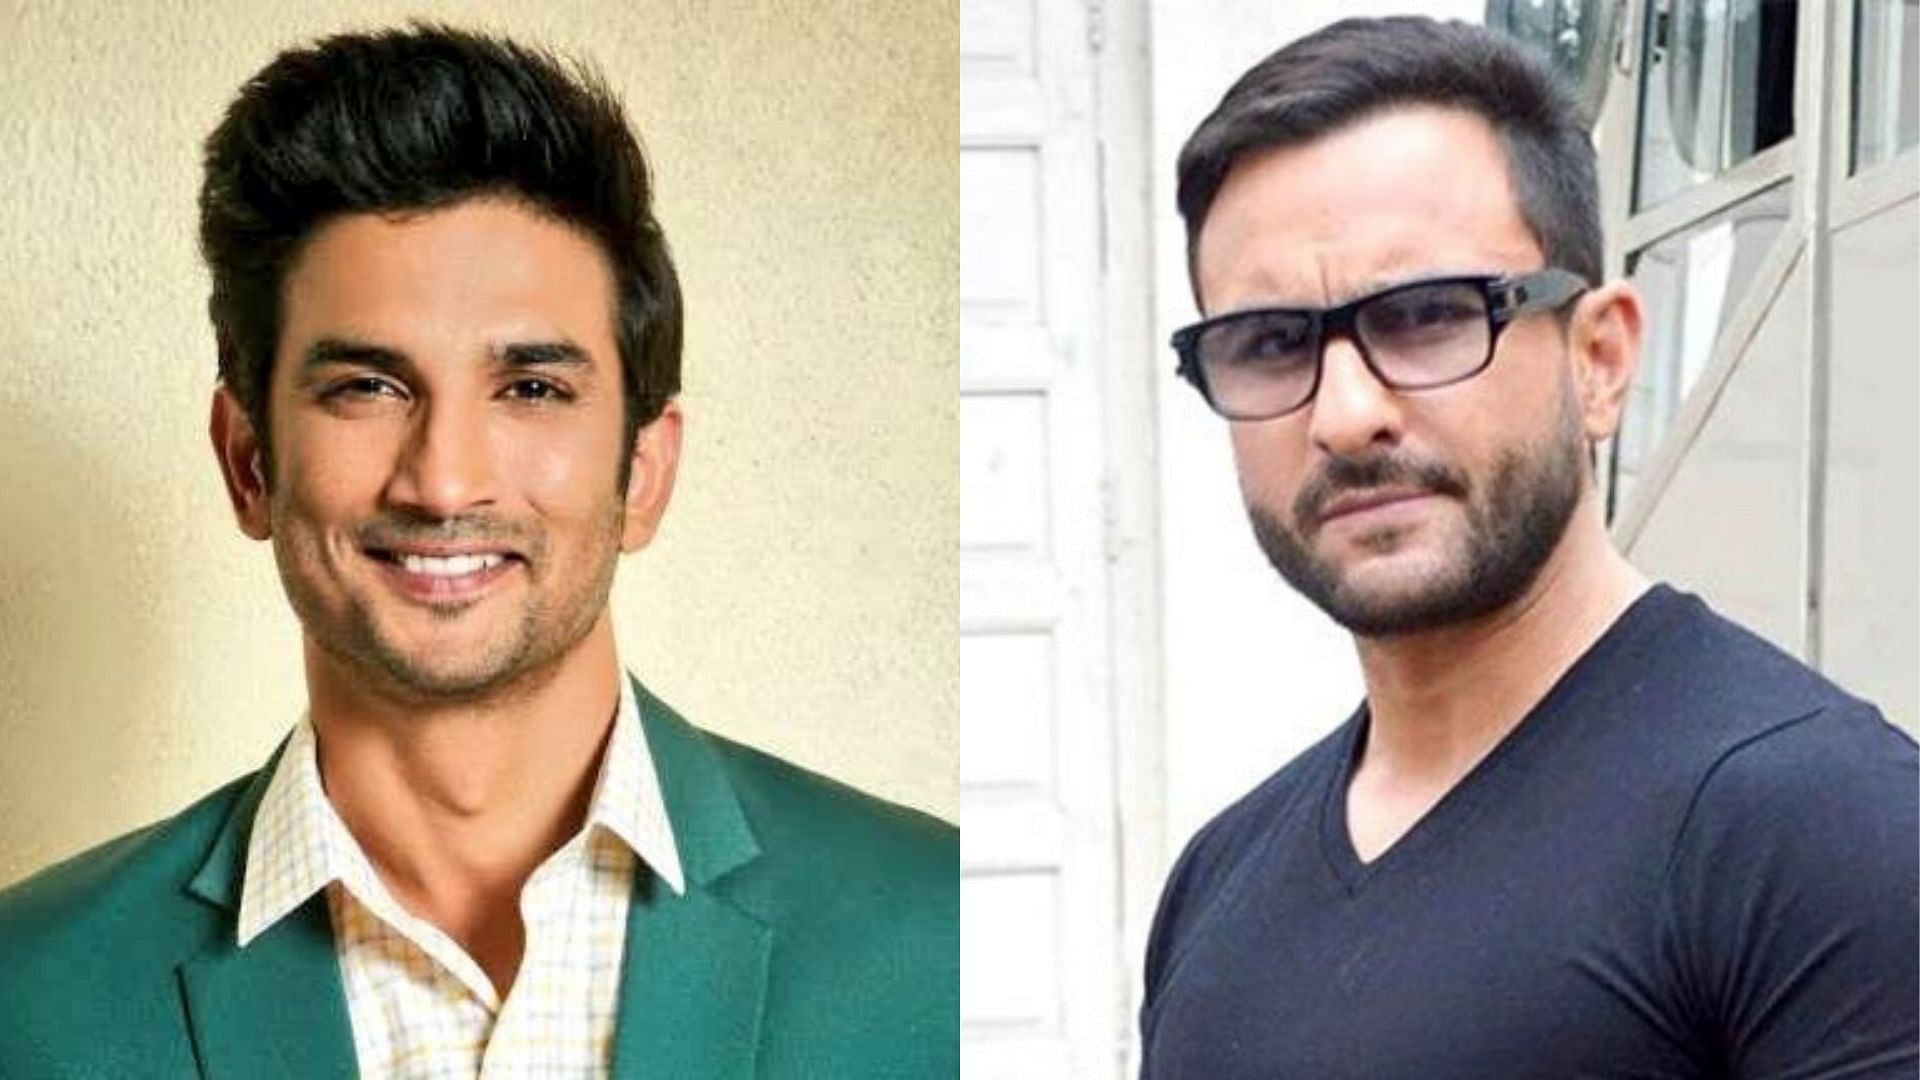 Saif Ali Khan talks about working with Sushant Singh Rajput in <i>Dil Bechara.</i>